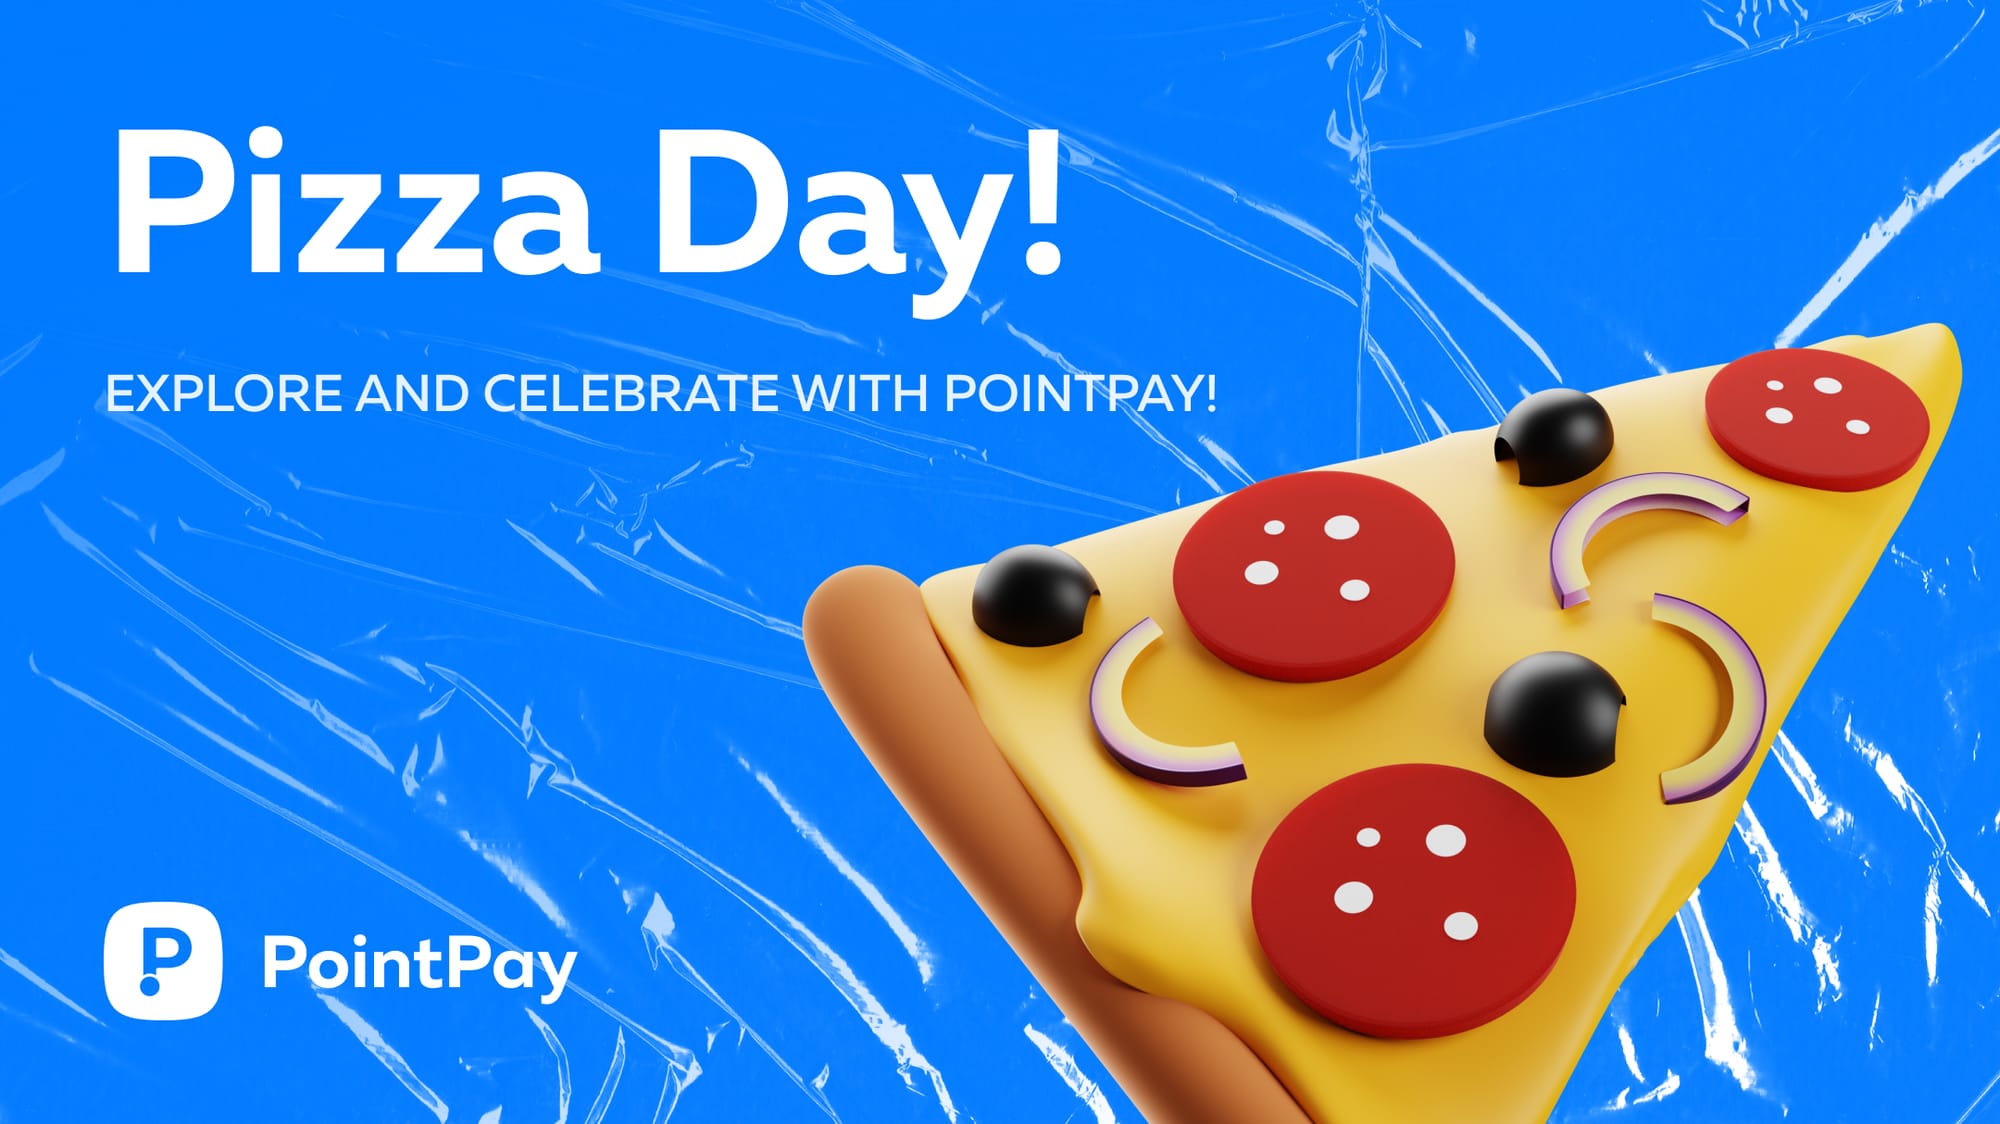 Pizza Day at PointPay!